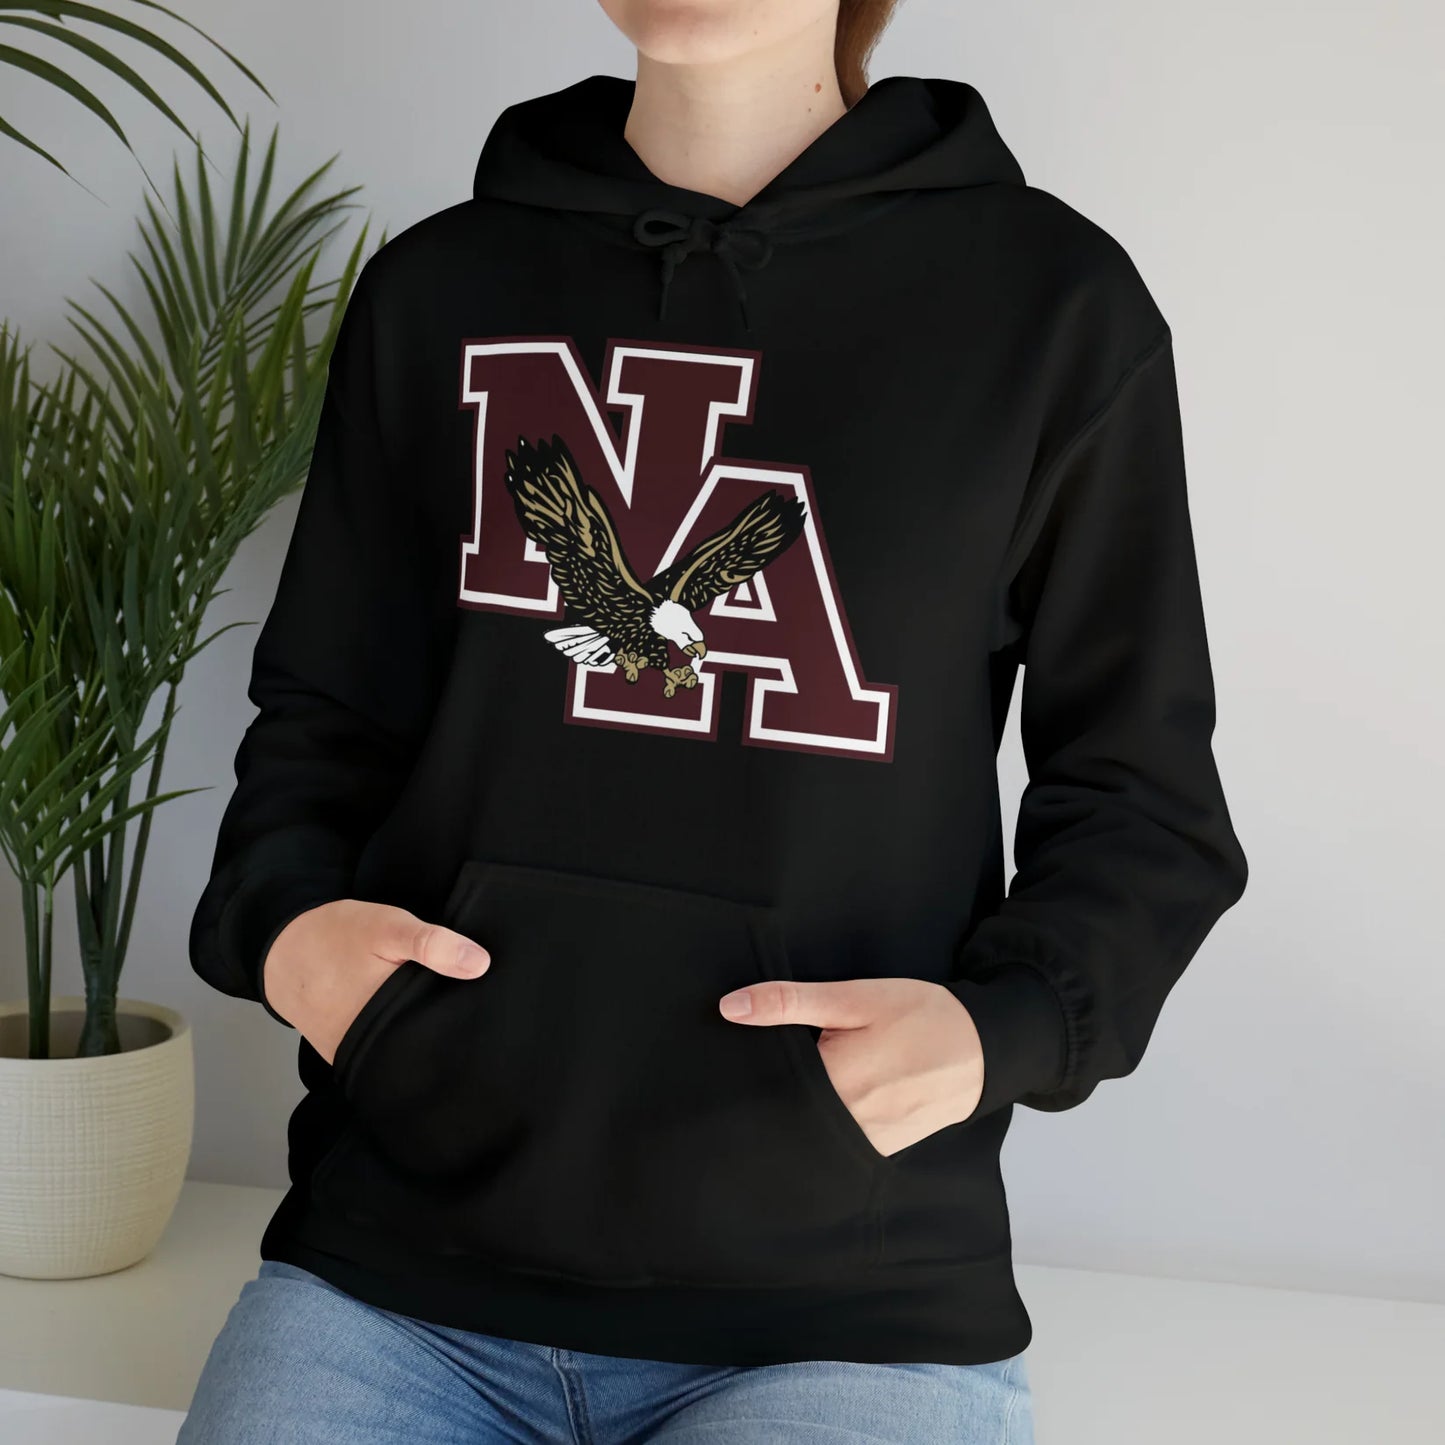 Adult Unisex Classic Logo Graphic Hoodie - New Albany Eagles